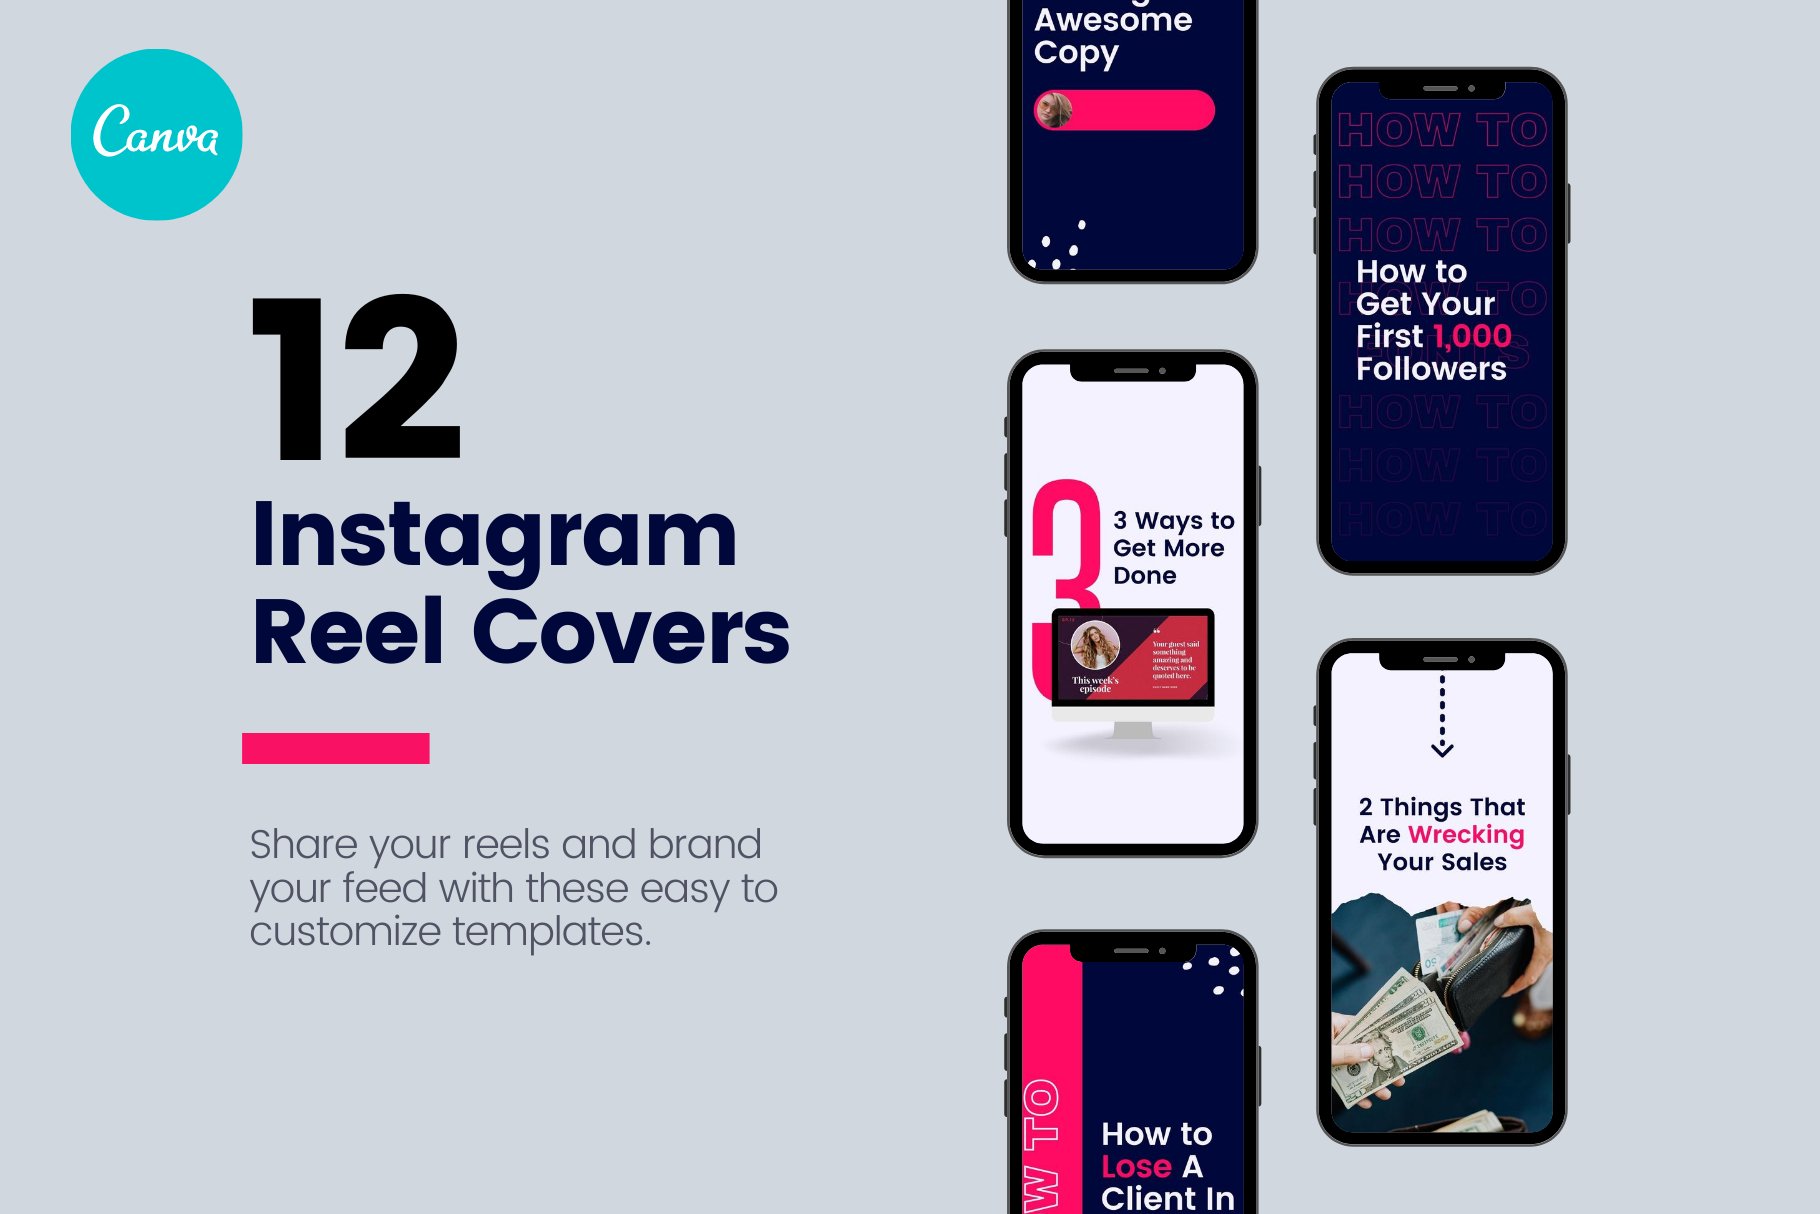 Instagram Reels Canva Templates cover image.